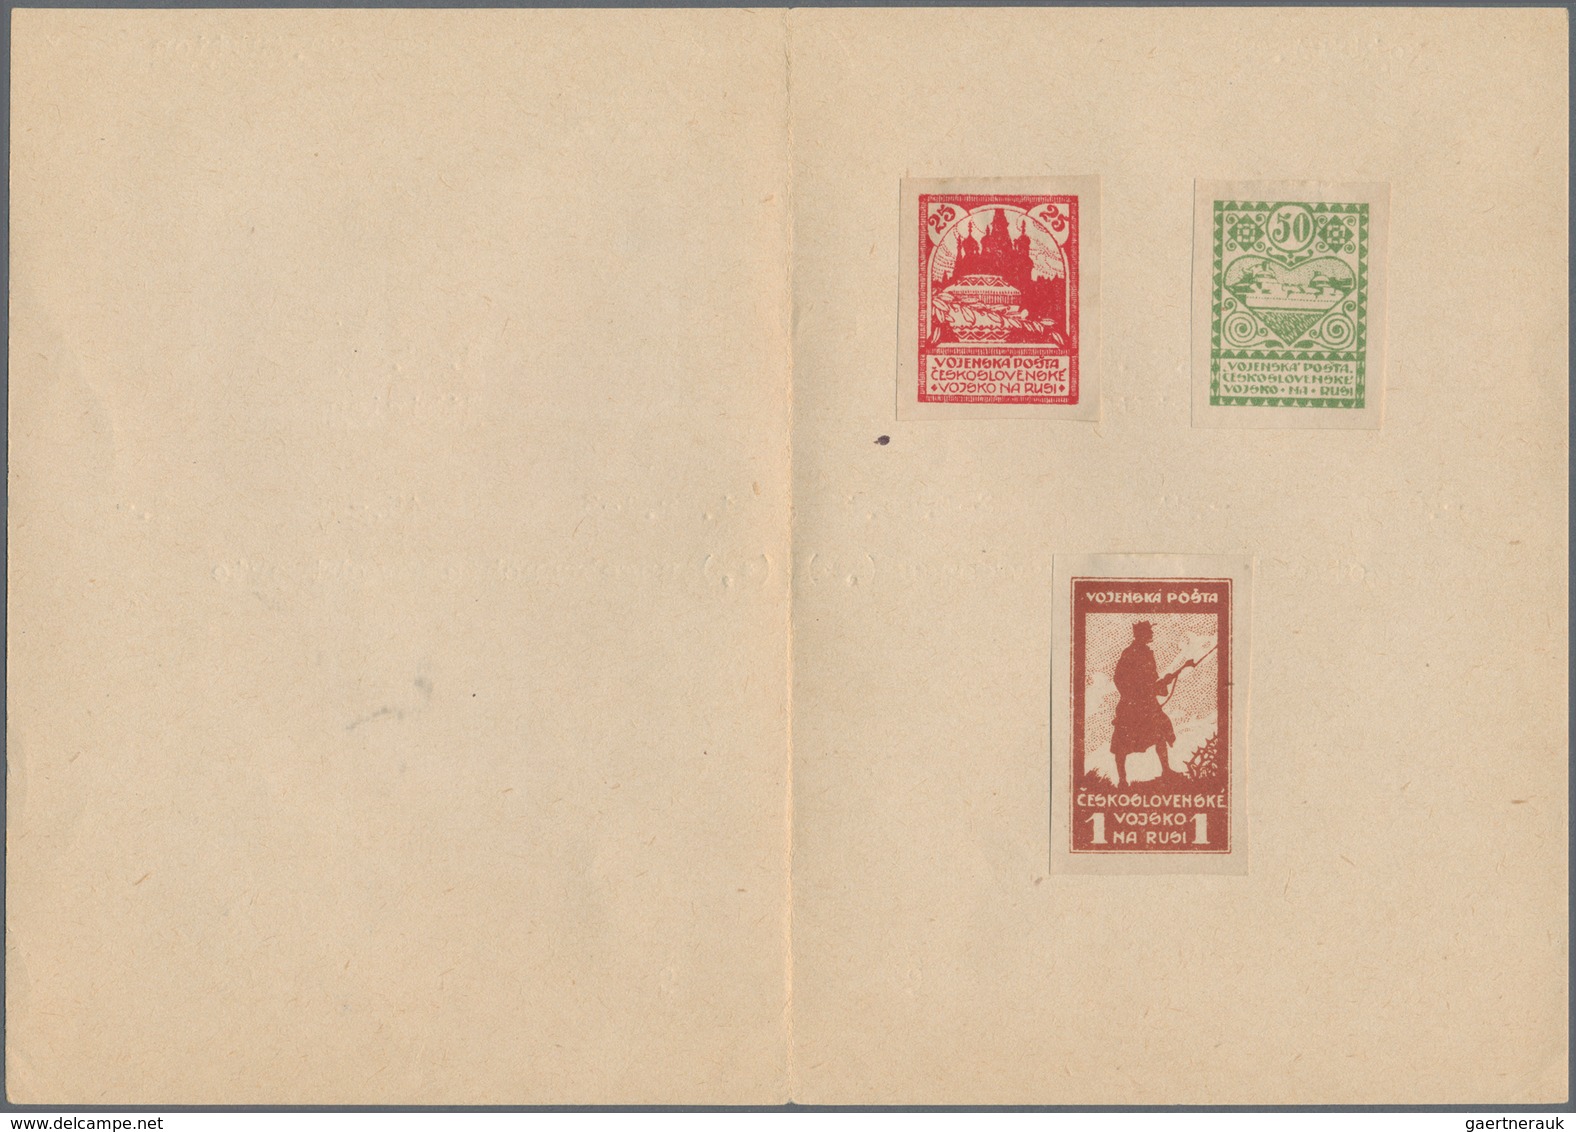 Tschechoslowakei: 1918/1920, a splendid mint lot of 28 stamps incl. a nice selection of overprints (